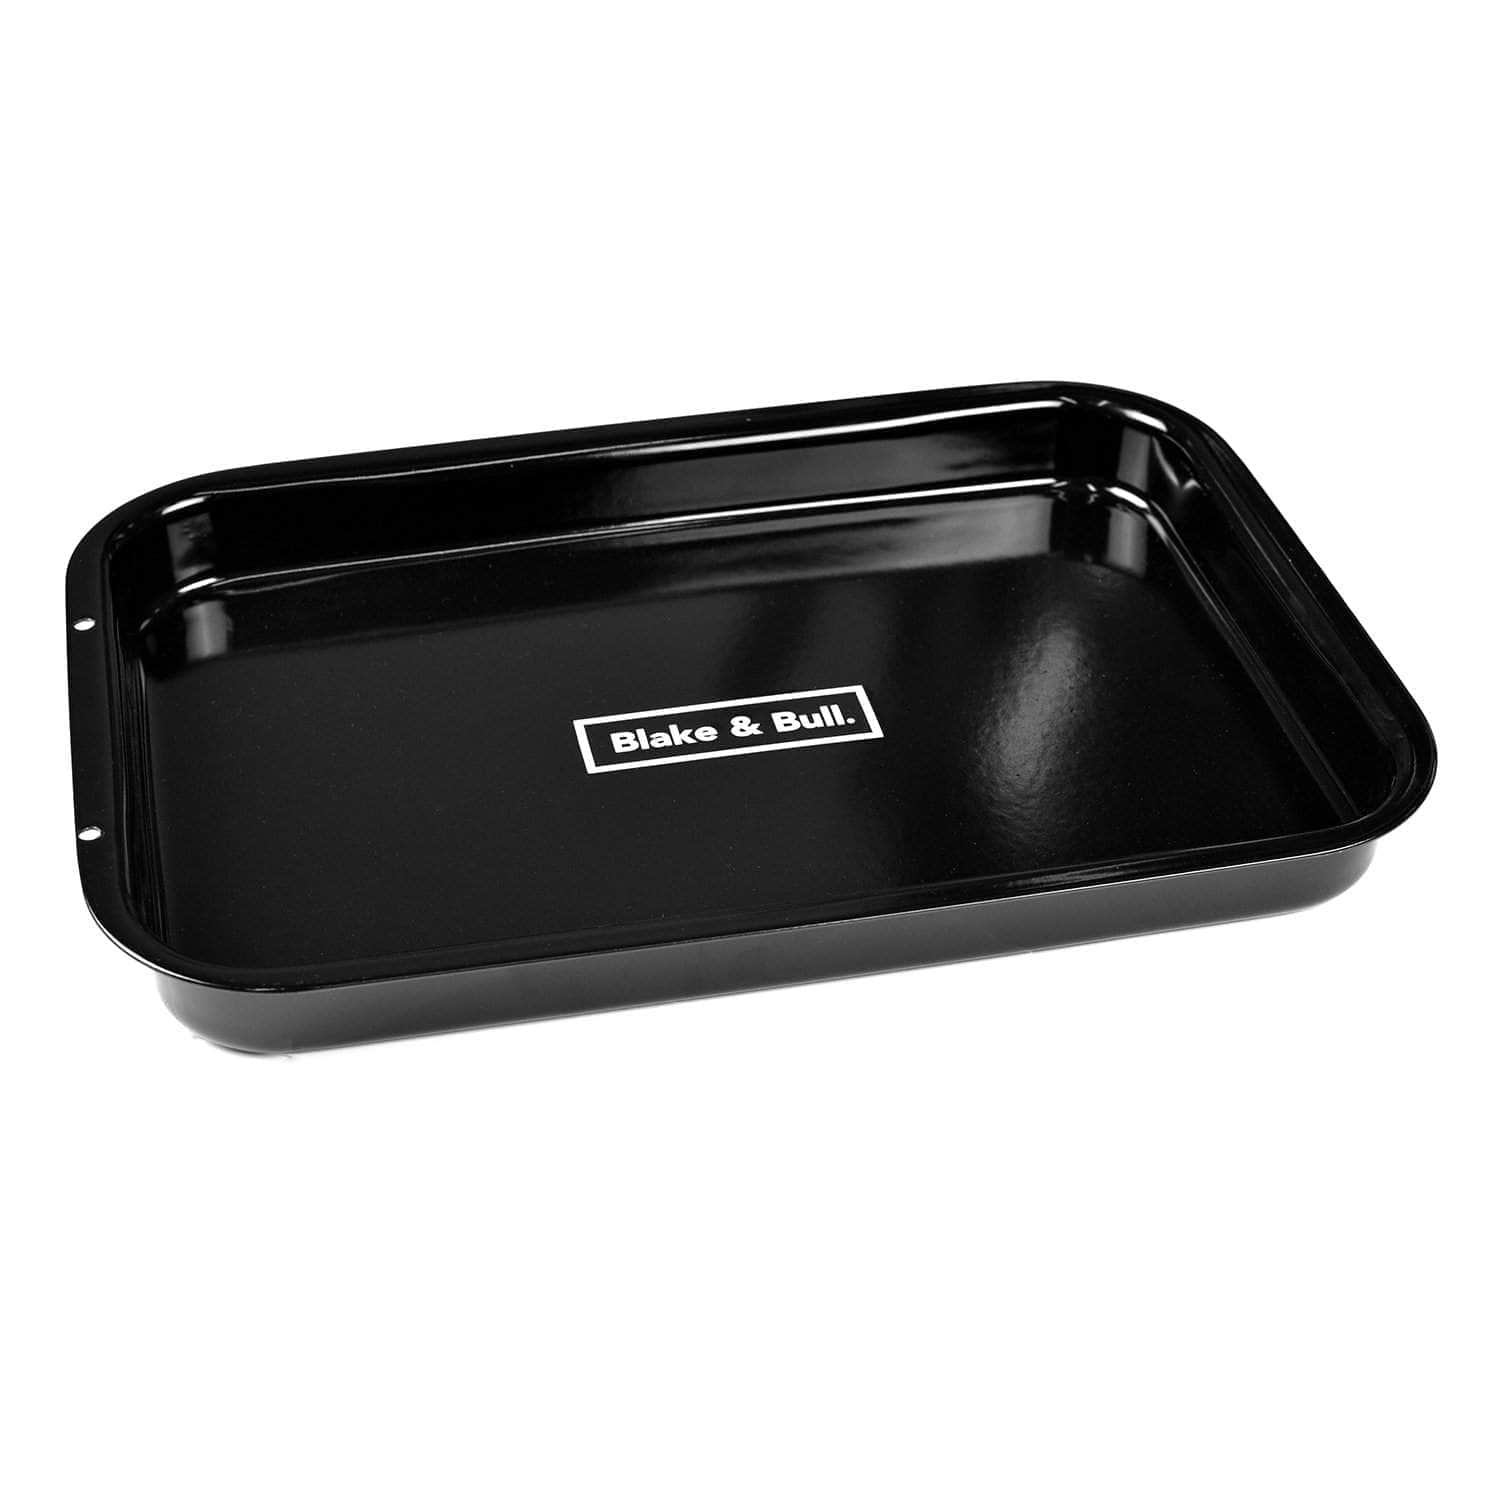 *Not quite perfect* 'Fits on runners' black enamelled tray bake for use with Aga range cookers 'half oven' size